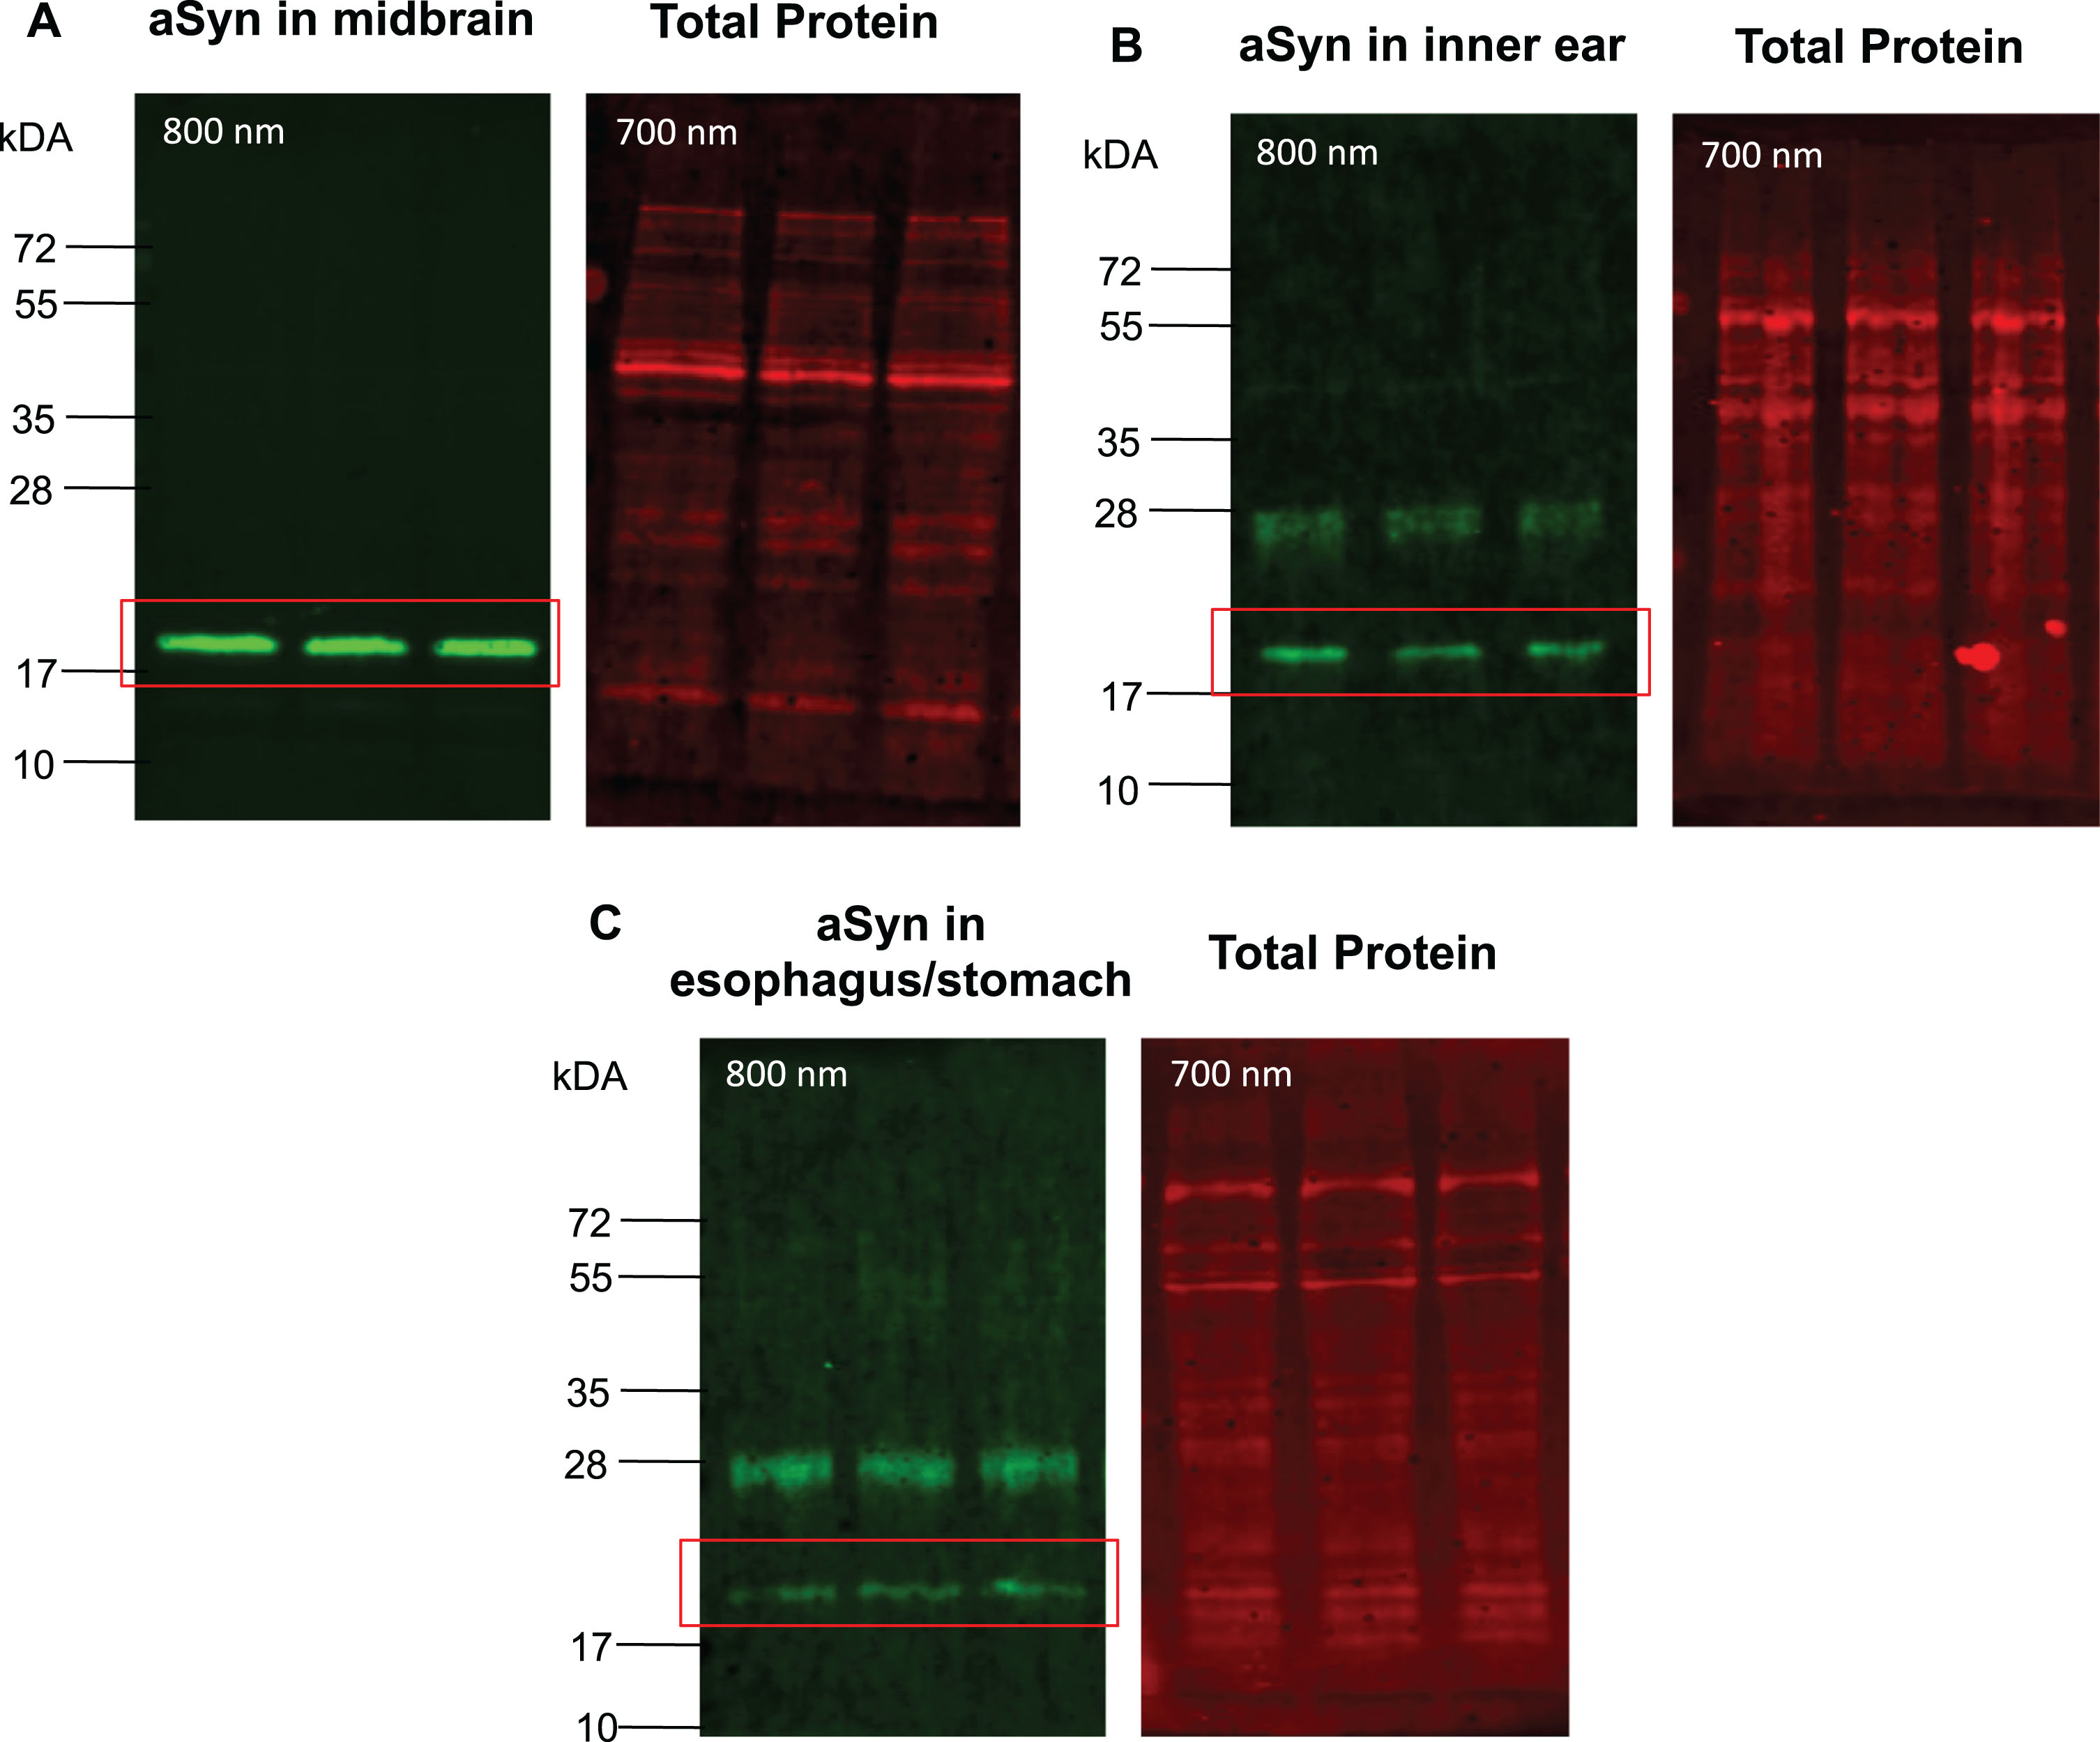 Detection of aSyn in tissue lysates through SDS-PAGE immunoblot. Tissue lysates of five 15-month-old WT mice were subjected to SDS-PAGE. 20μg of protein lysates from midbrain (A), inner ear (B), and esophagus/stomach tissues (C) were loaded in triplicates and separated in the same polyacrylamide gel. The n4 runs were selected for each tissue for representation of the membrane. After transfer, membranes were stained in Total Protein Stain solution and then fixed with 4% PFA for 1 h at RT before incubation with anti-total aSyn antibody solution, followed by incubation with the IRDye-conjugated secondary anti-mouse antibody. The fluorescent immunodetection of the aSyn signal was performed at 800 nm, the total protein signal at 700 nm on the same membrane using Odyssey CLx (Li-Cor).